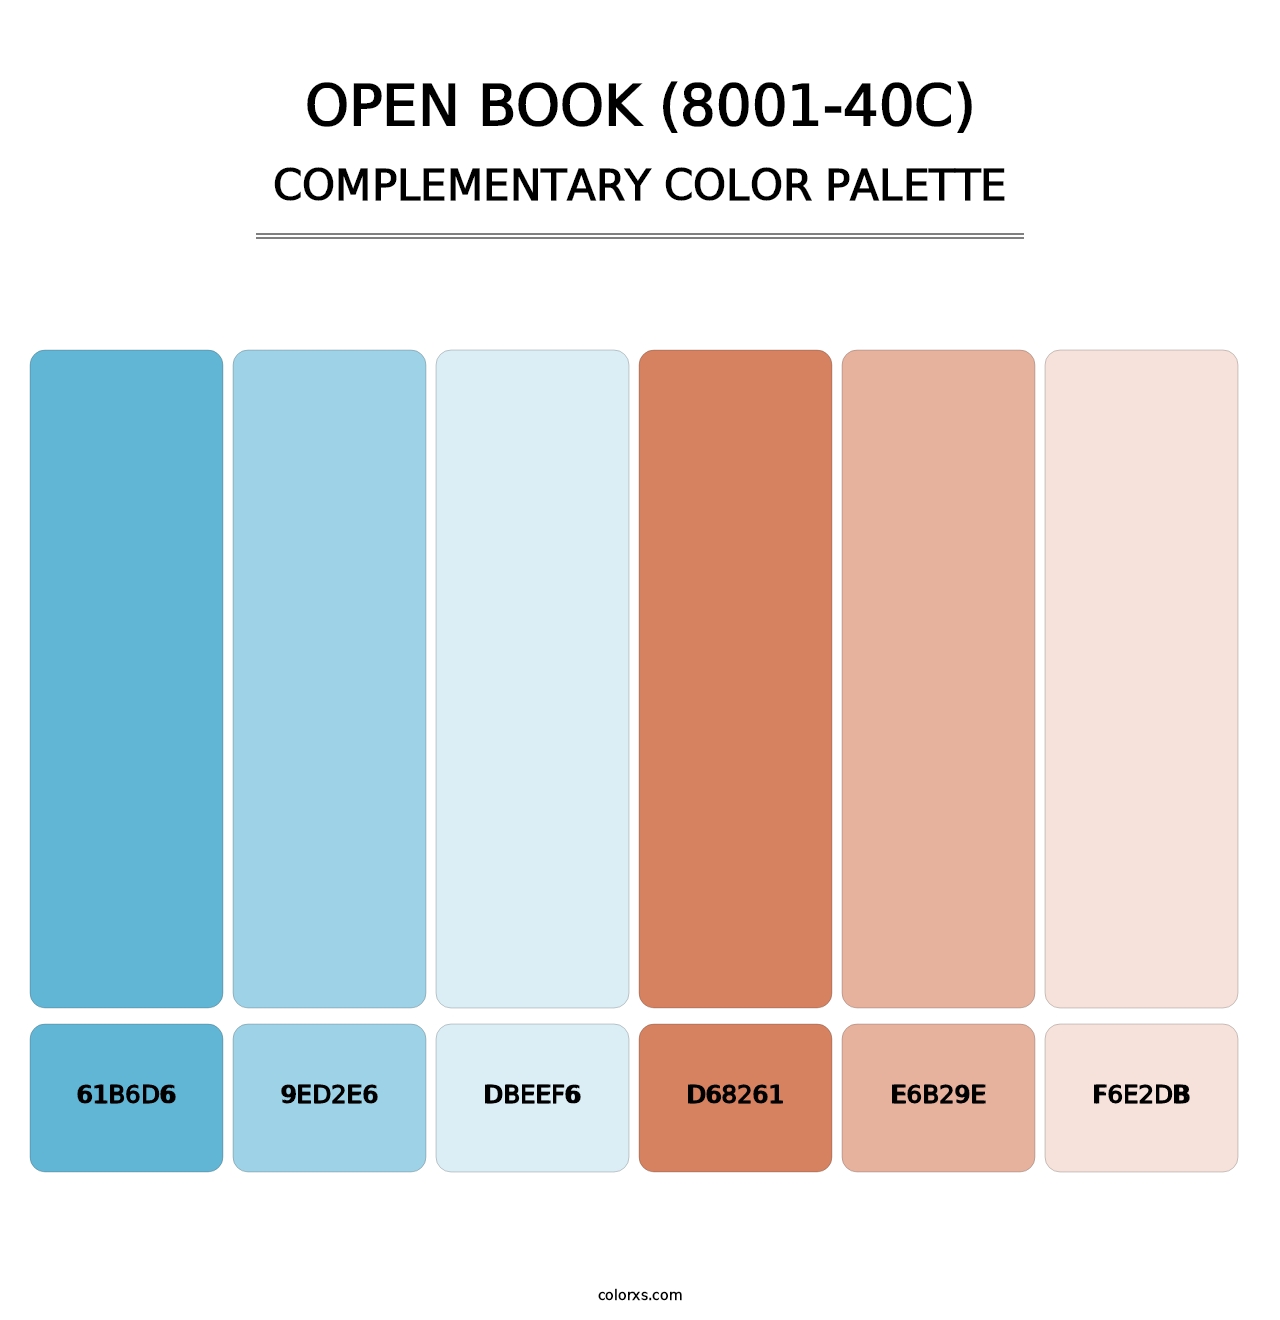 Open Book (8001-40C) - Complementary Color Palette